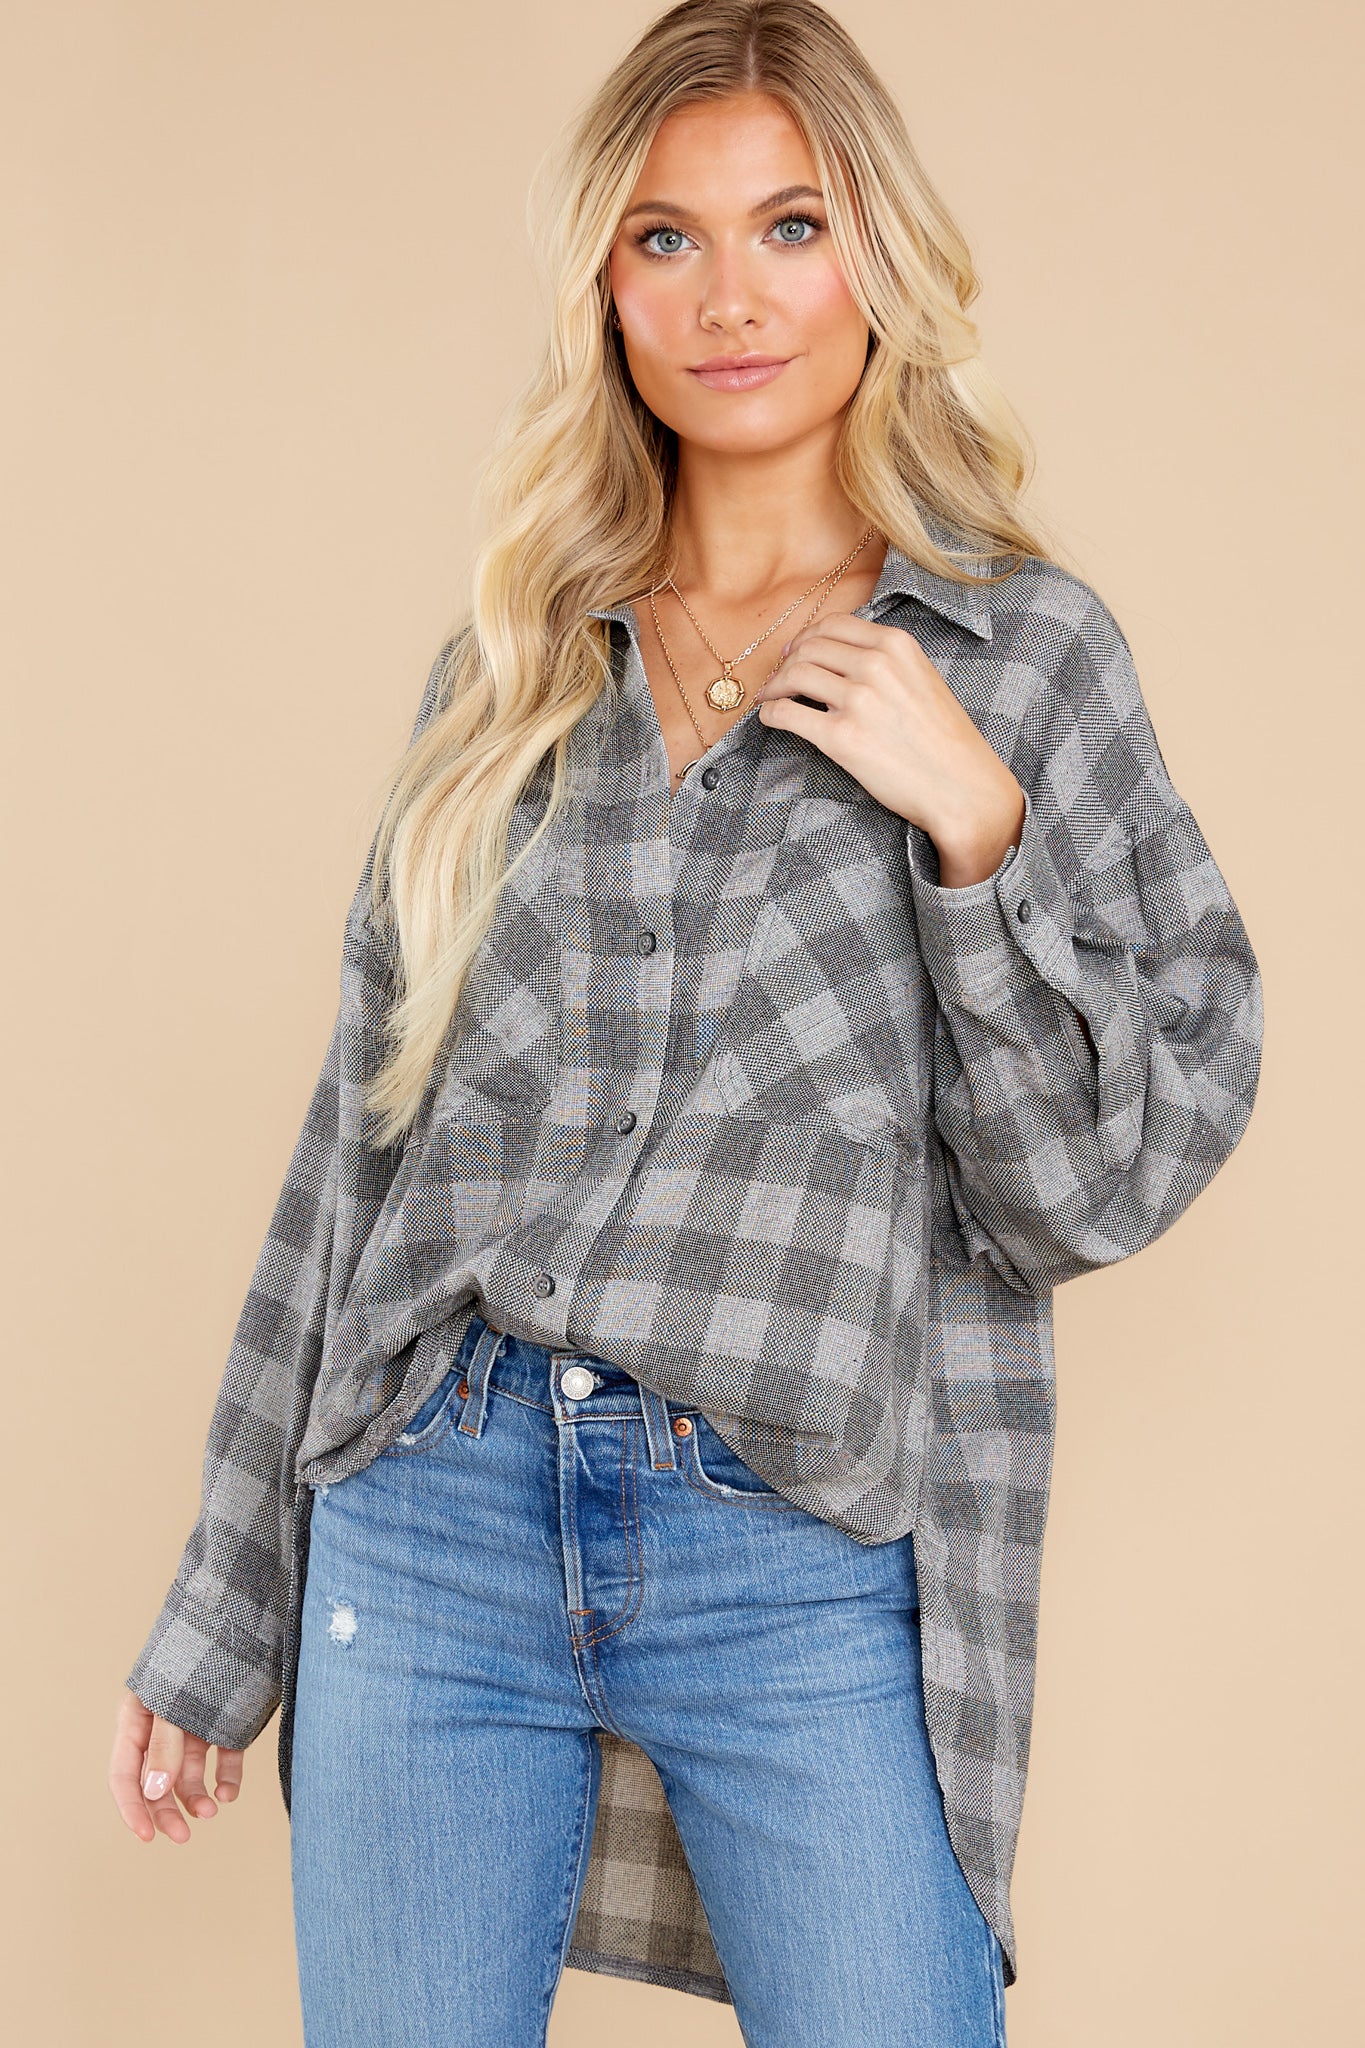 Cute Grey Plaid Top - Button Up Tops | Red Dress